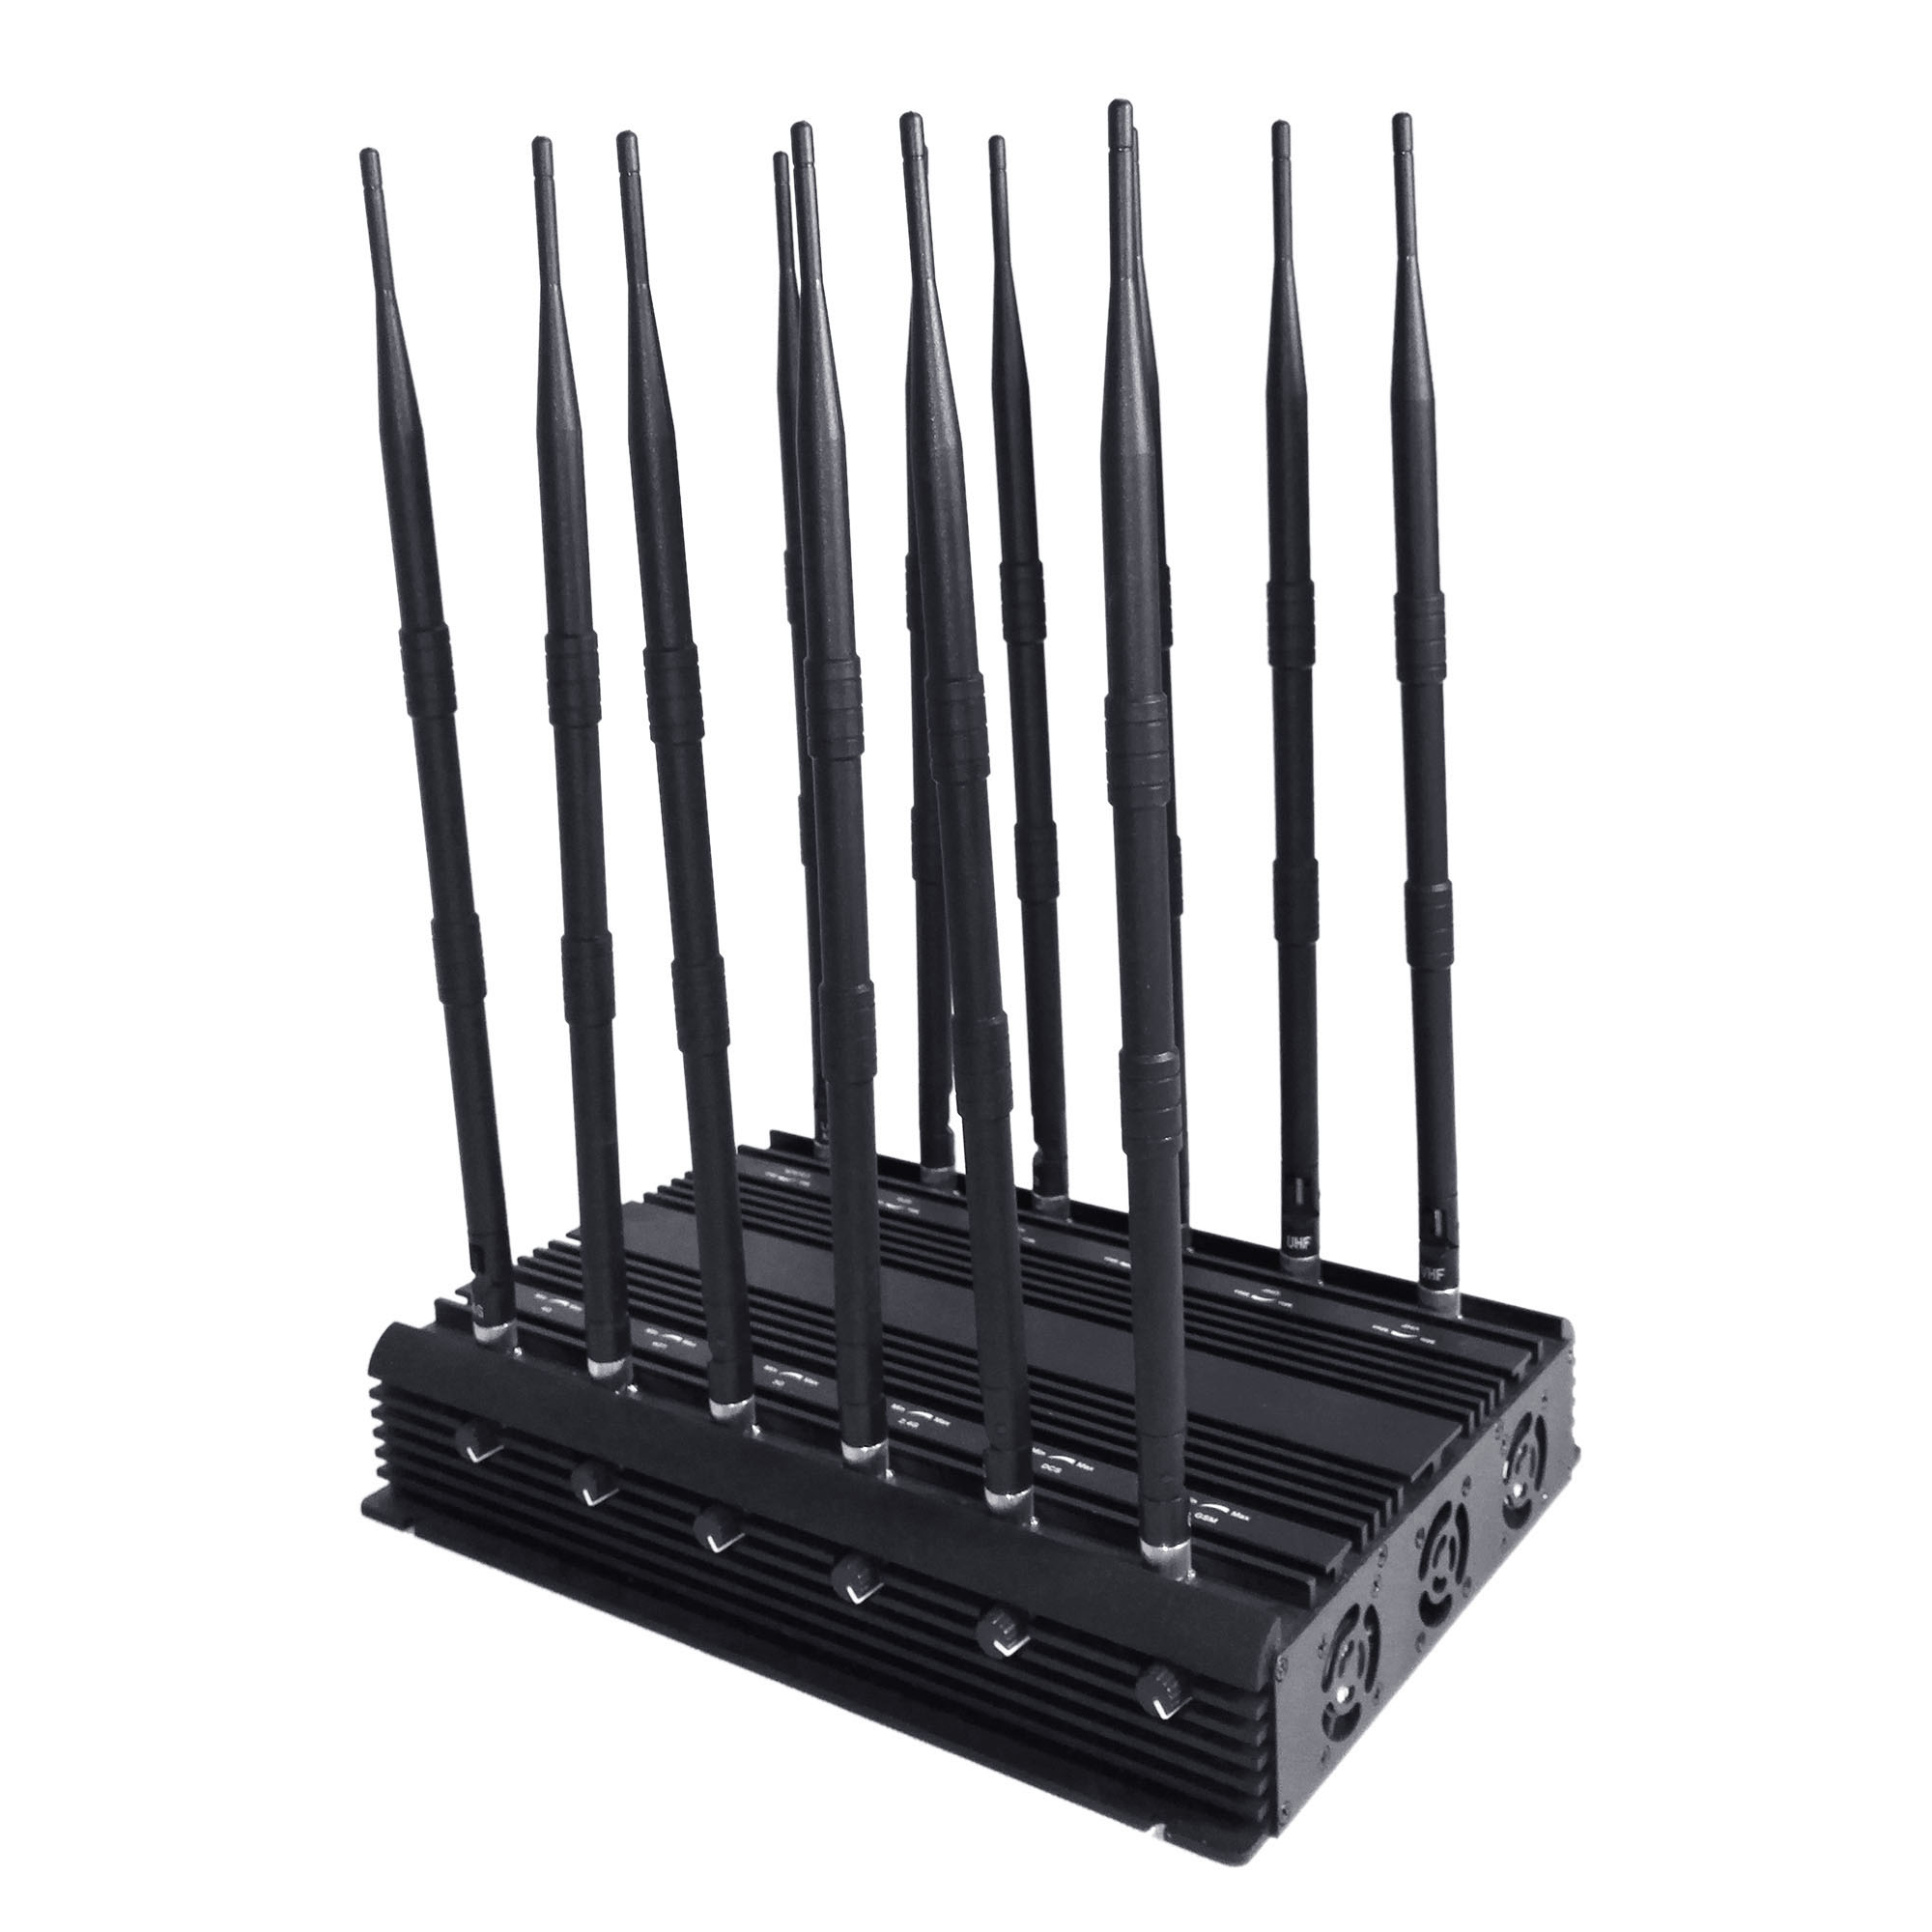 network jammer bd eclipse , 12 Antennas High Power Wireless Cell Phone Jammer For 3G 4G Wi-Fi GPS LOJACK Signal Blockers